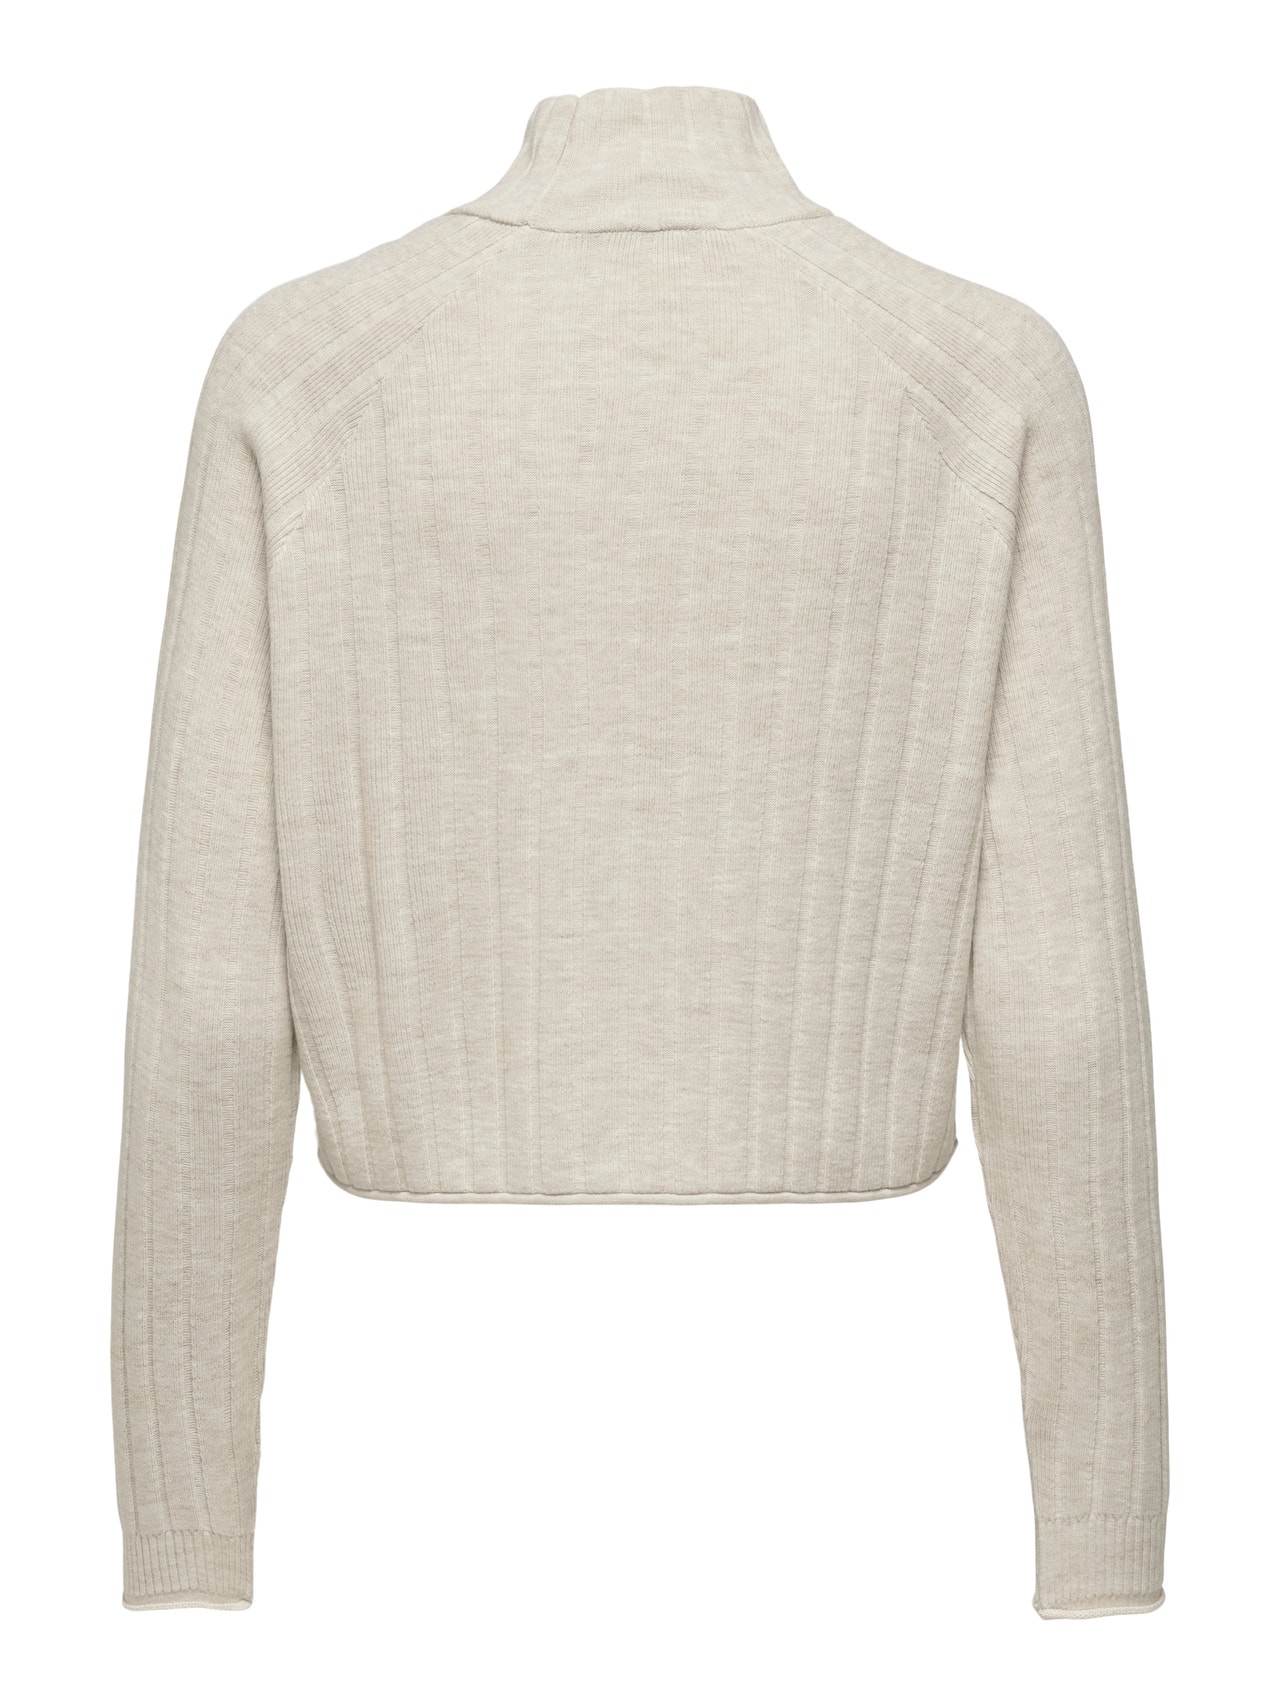 ONLY Hög hals Pullover -Pumice Stone - 15302180